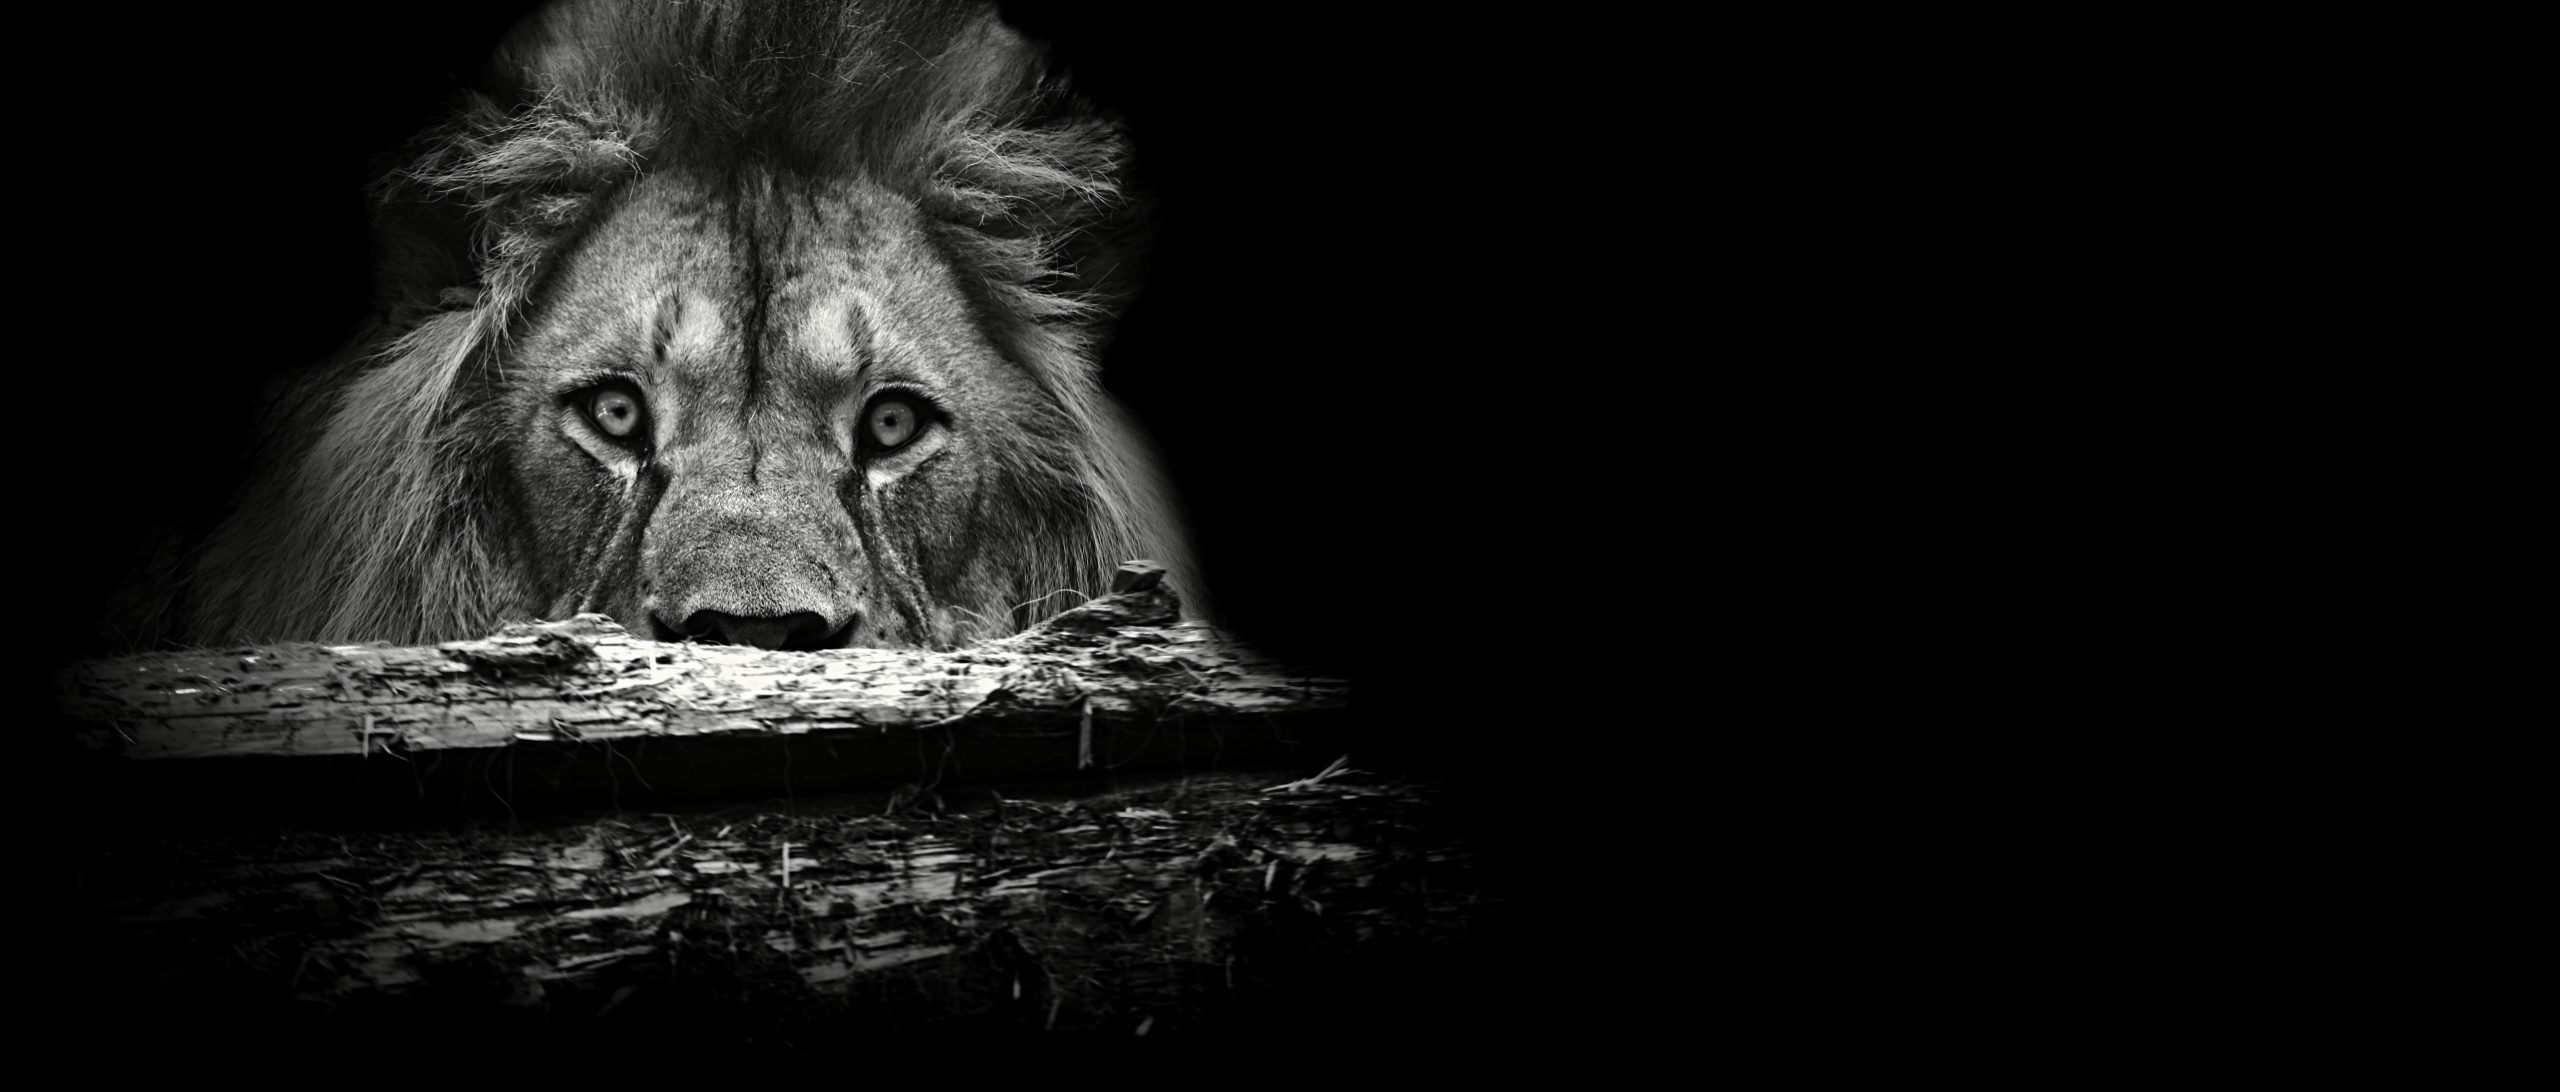 7 lessons from a leadership lion - WebMechanix